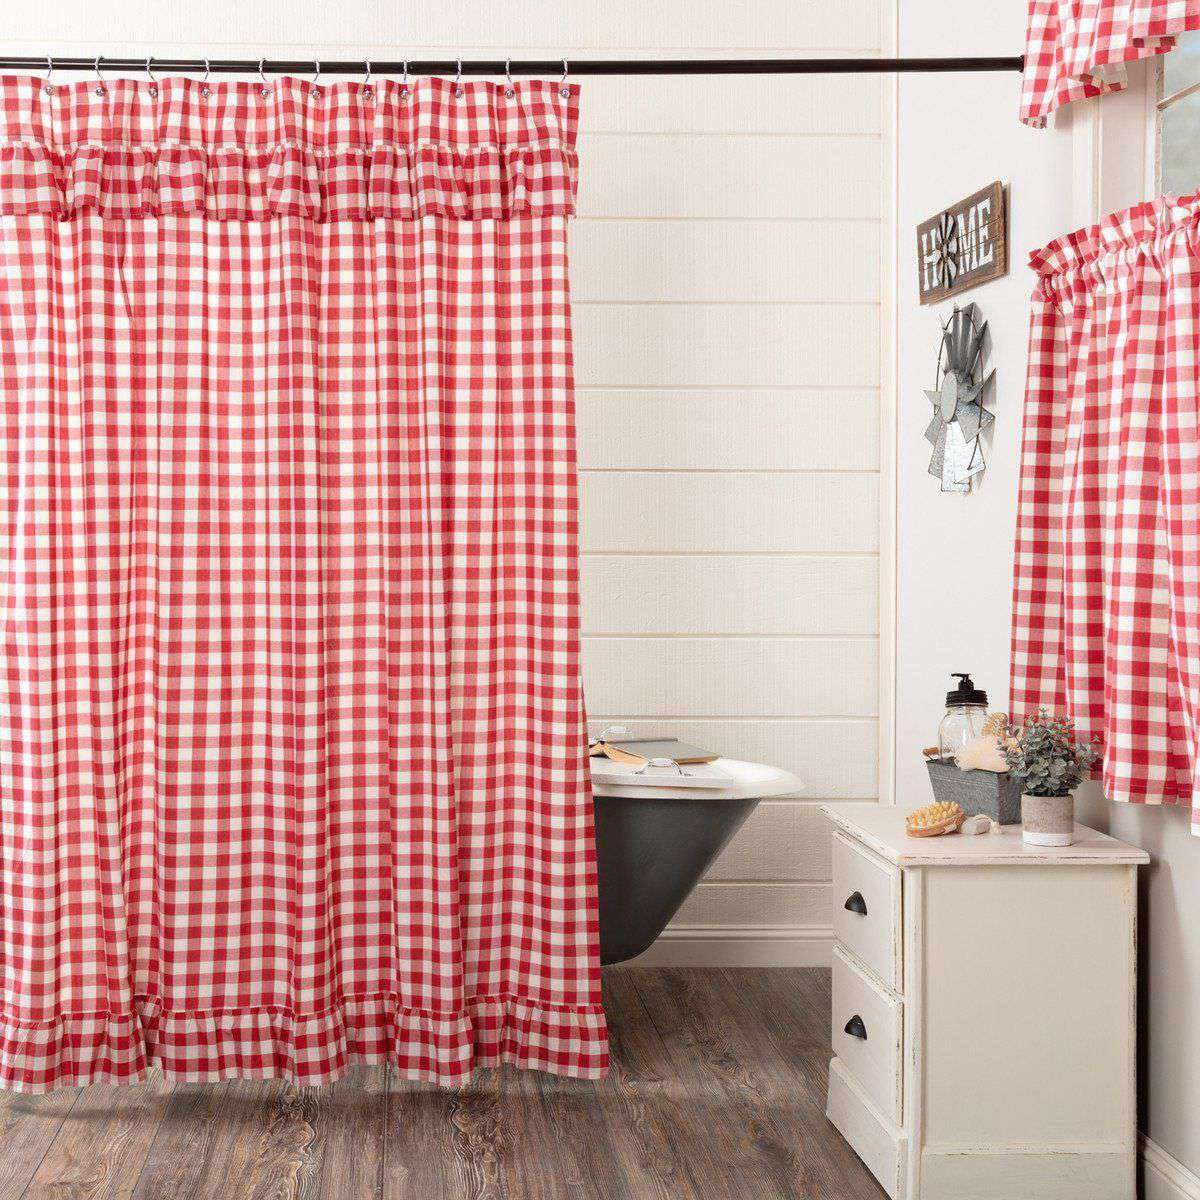 Annie Buffalo Black/Red Check Ruffled Shower Curtain 72"x72" curtain VHC Brands Red 